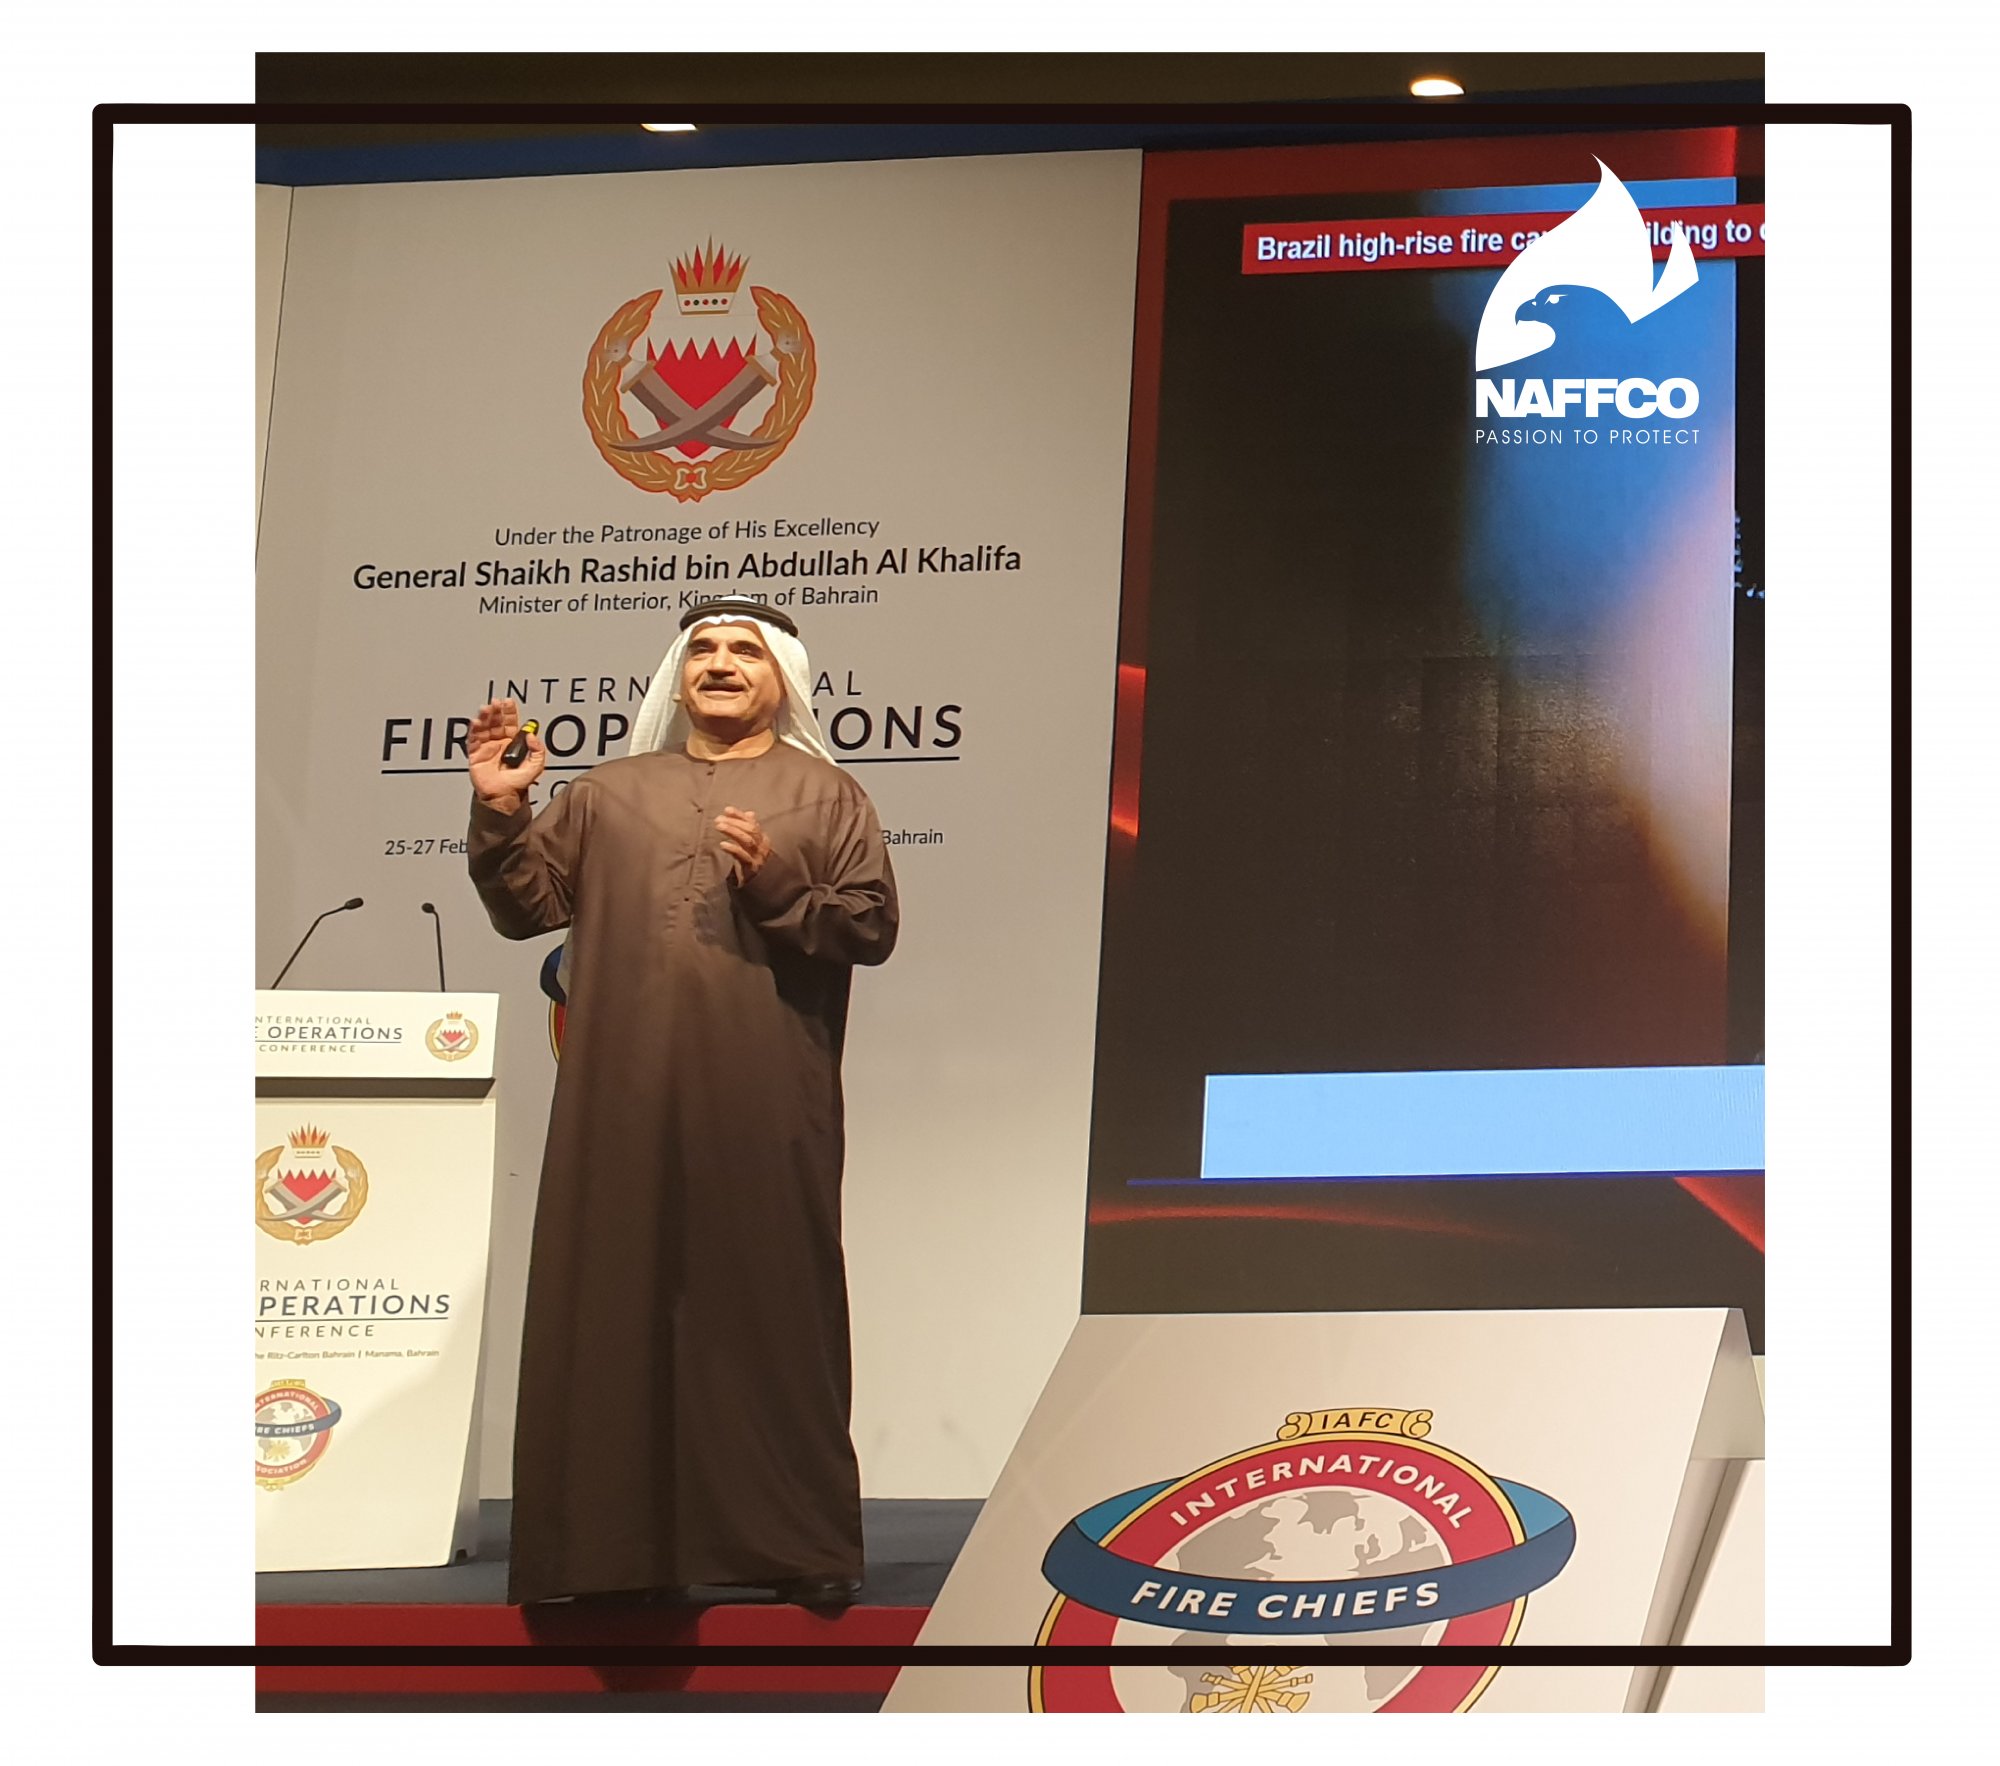 NAFFCO Group CEO Eng. Khalid Al Khatib giving Speech on Fire and Safety at IFOC 2019, Bahrain.